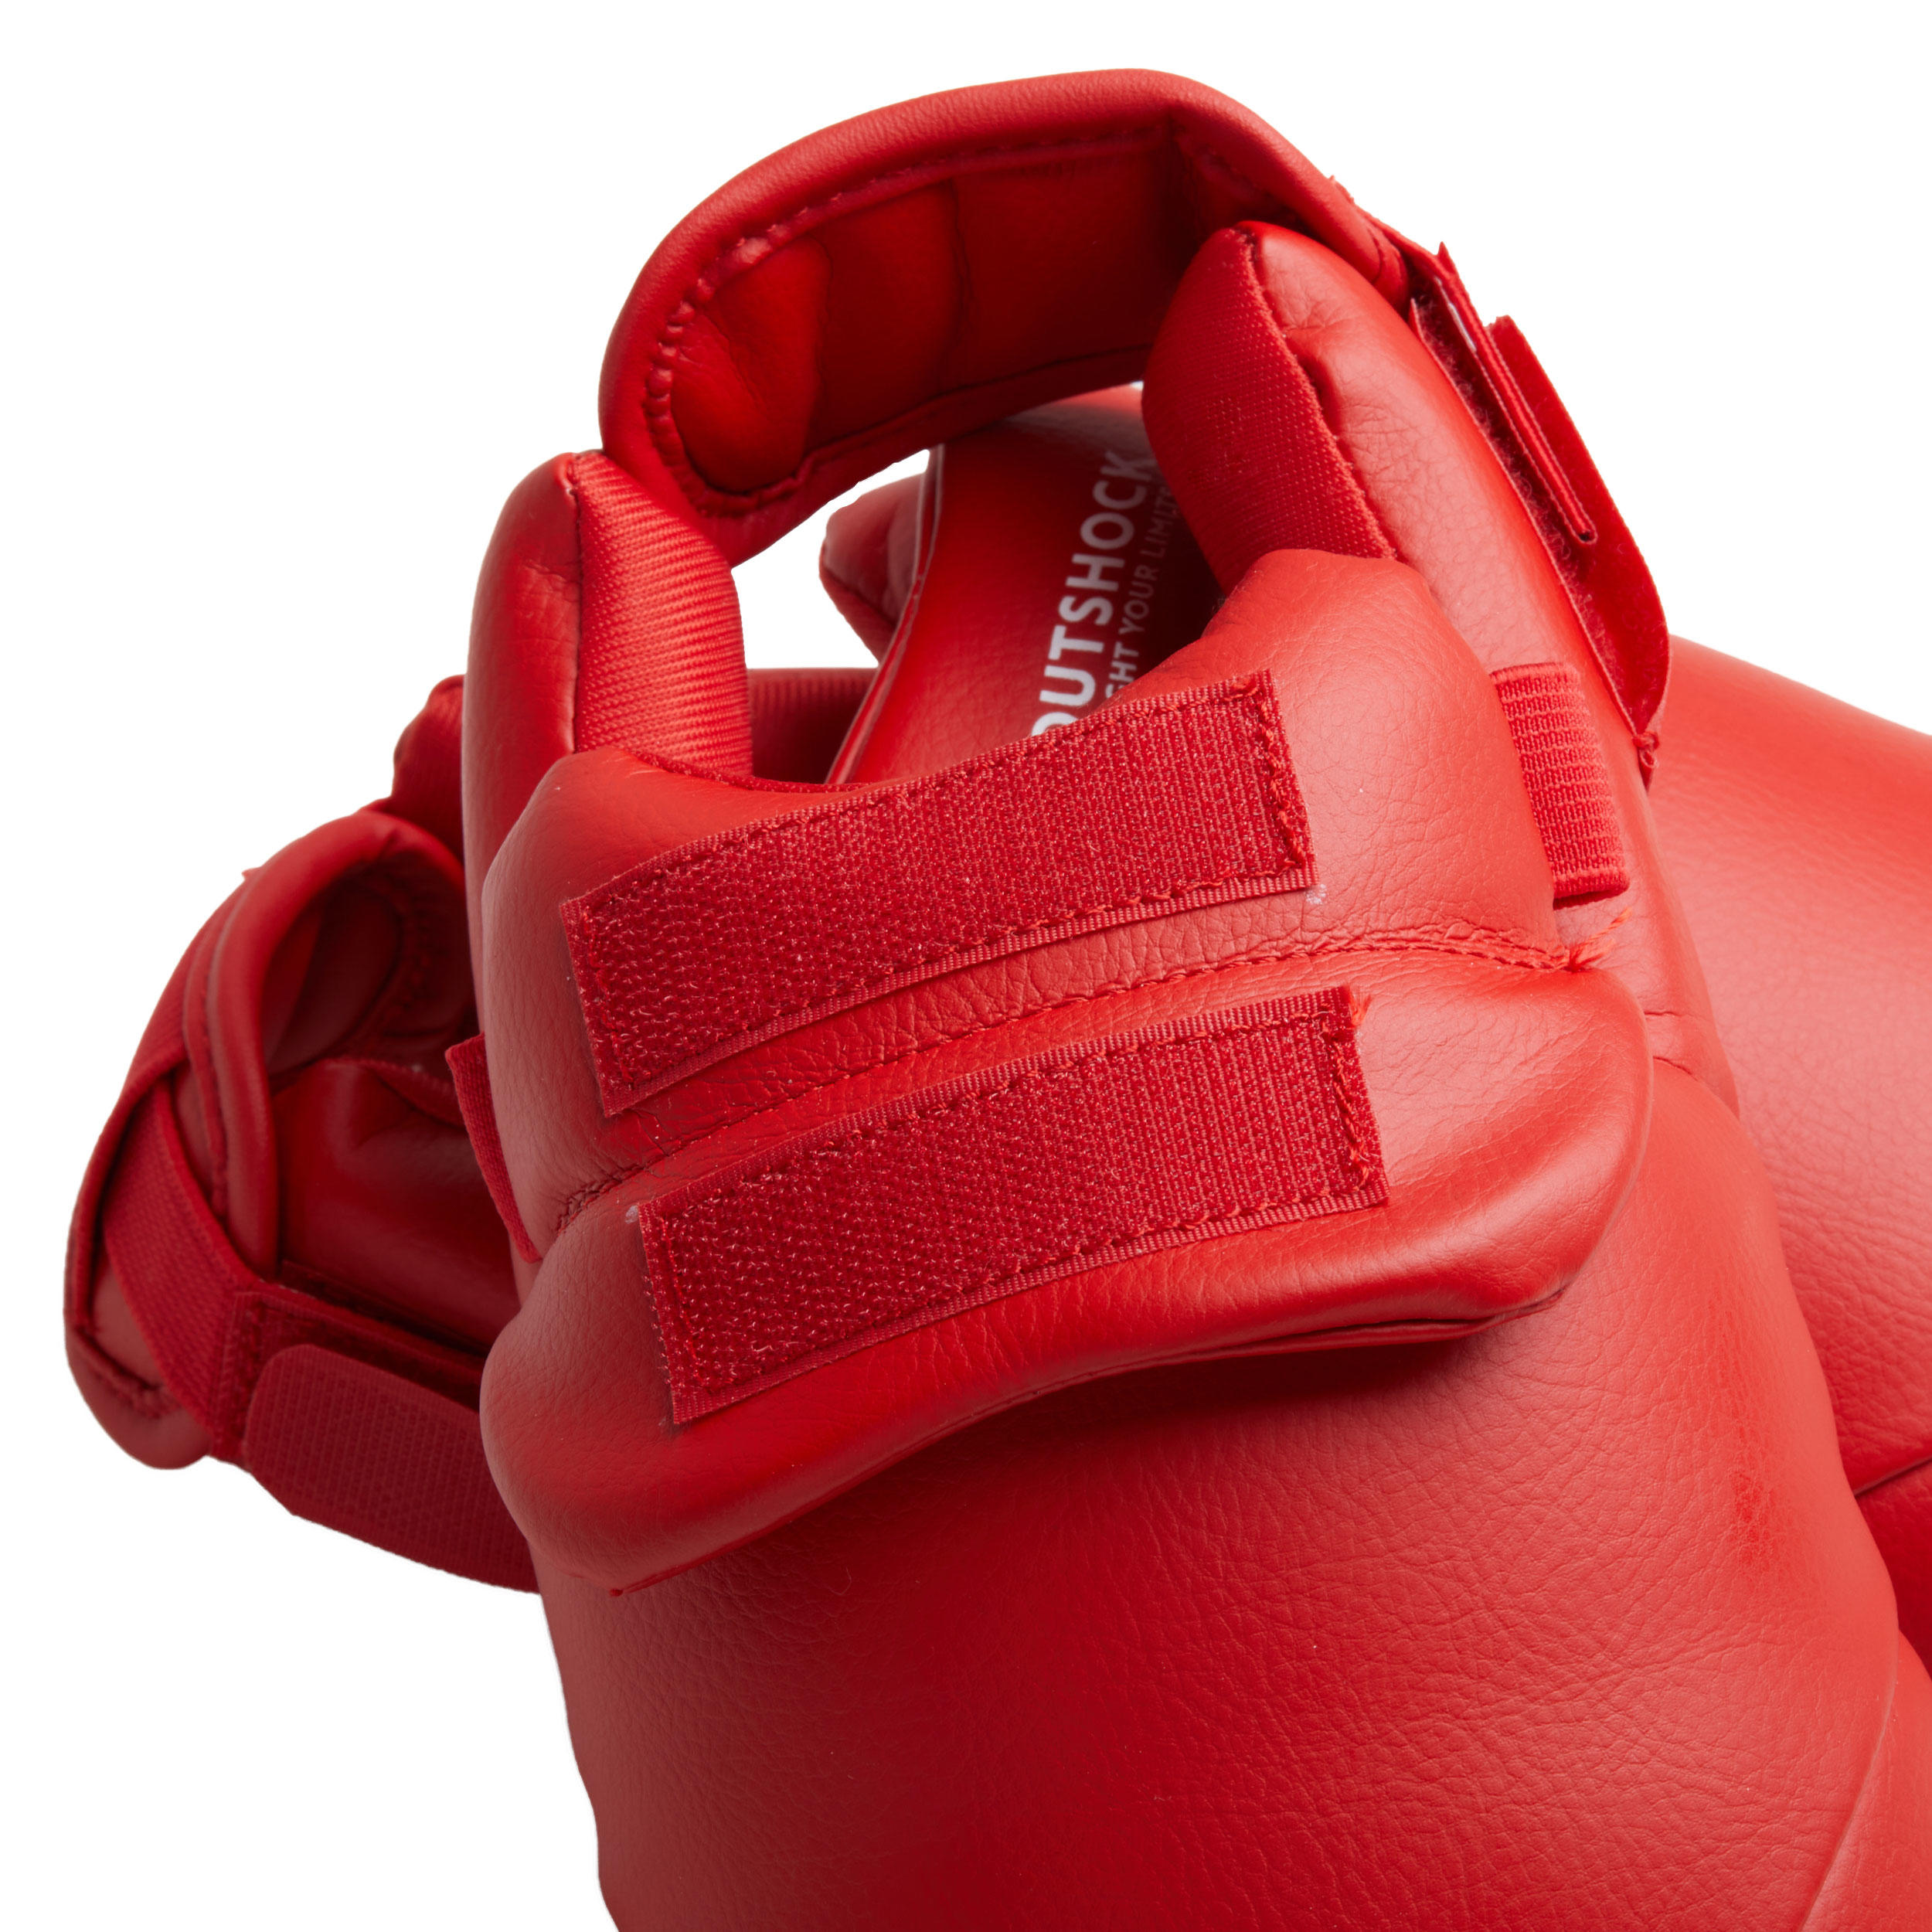 Karate Foot Protection - Red 3/5